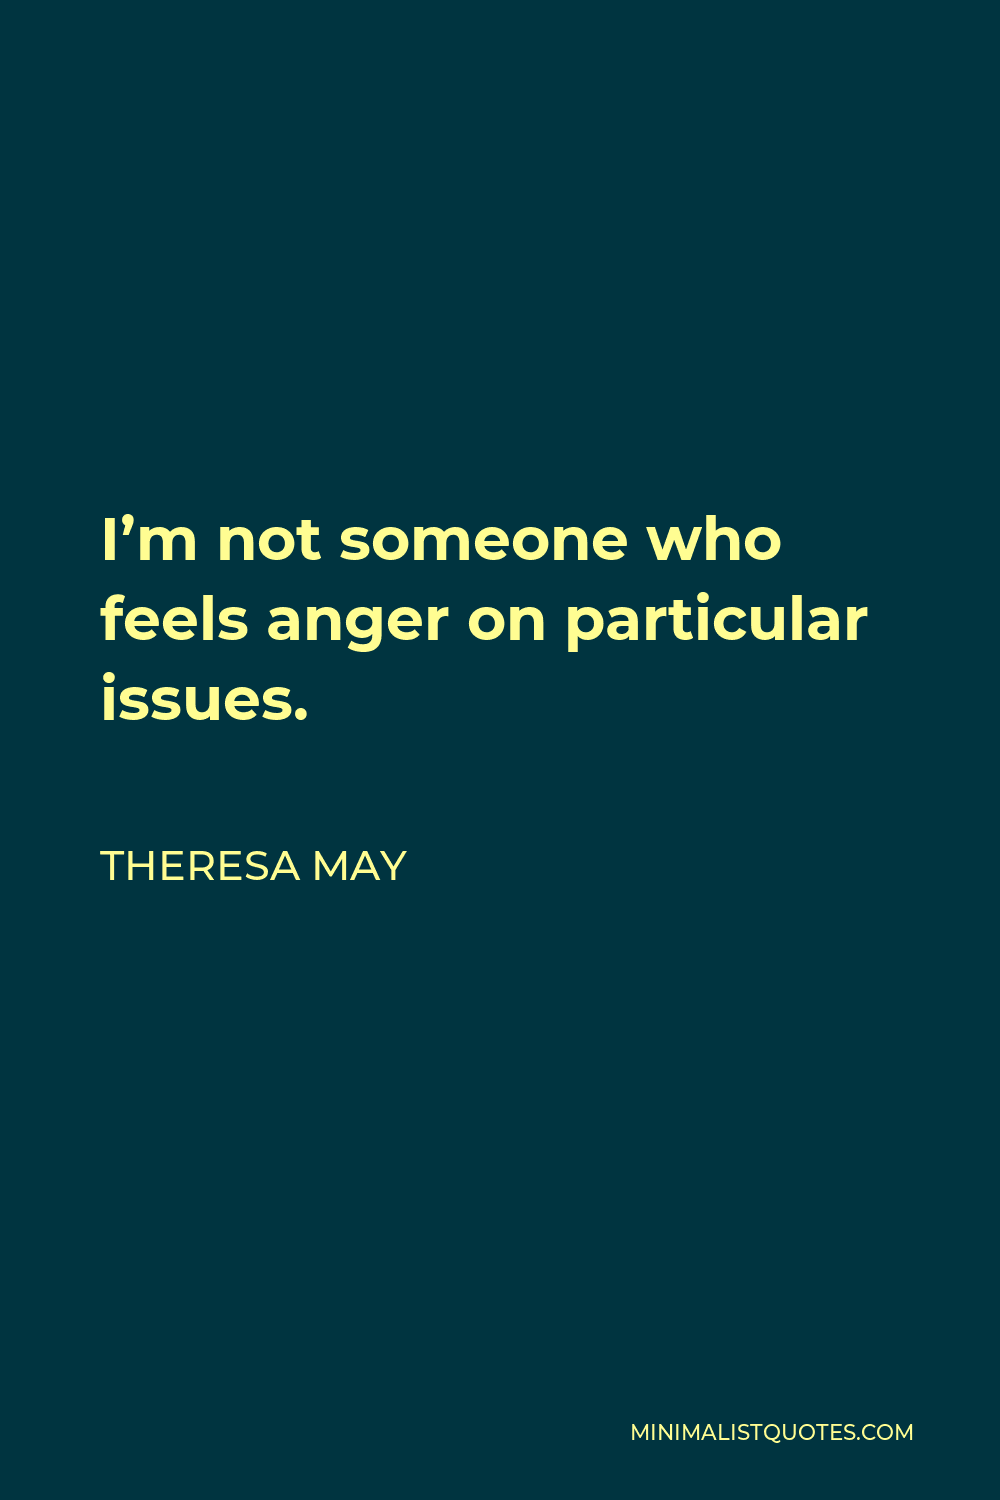 Theresa May Quote - I’m not someone who feels anger on particular issues.